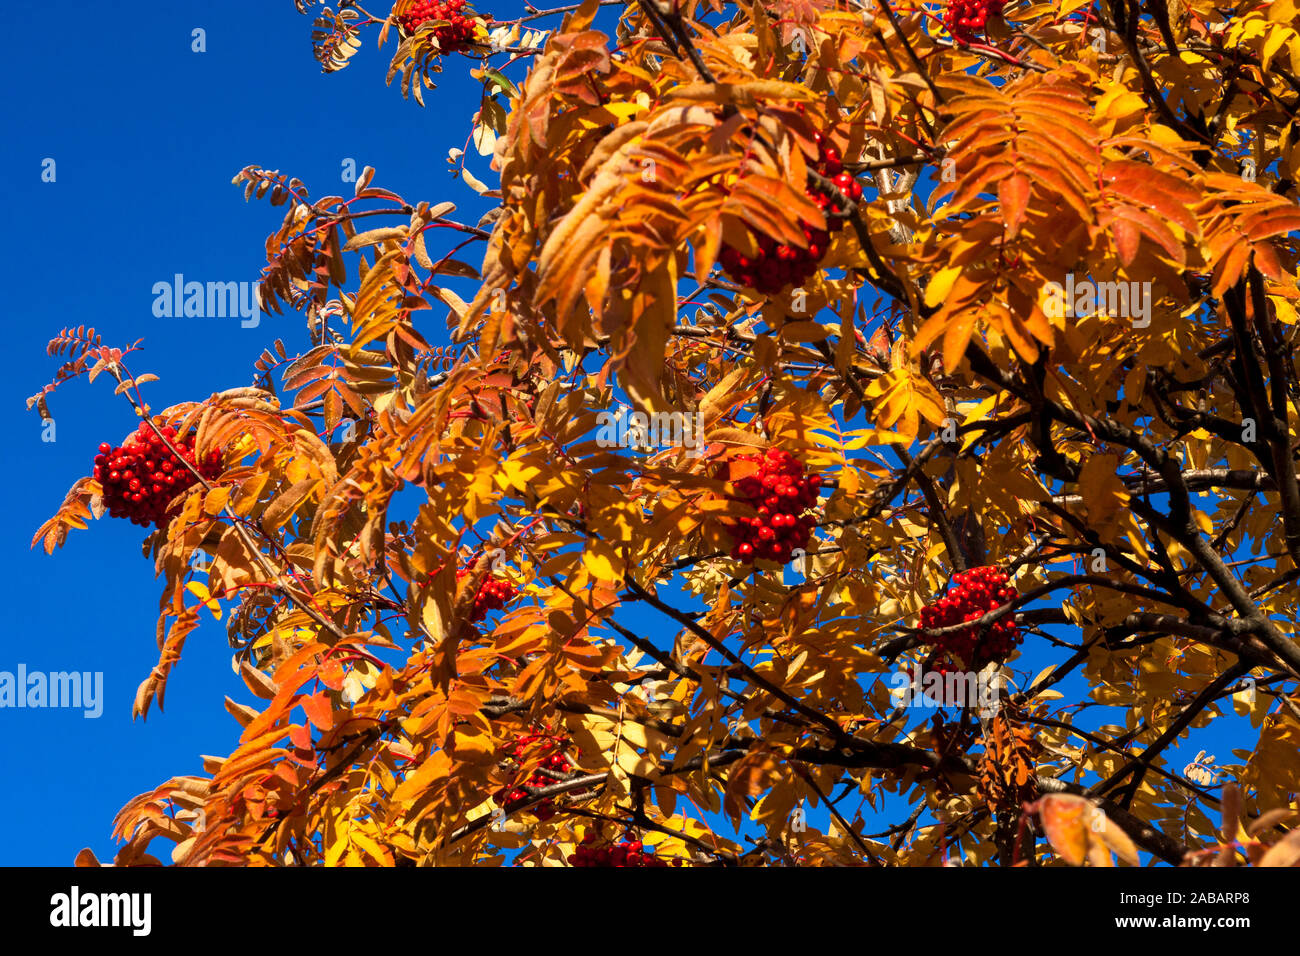 Rowan Norway High Resolution Stock Photography and Images - Alamy